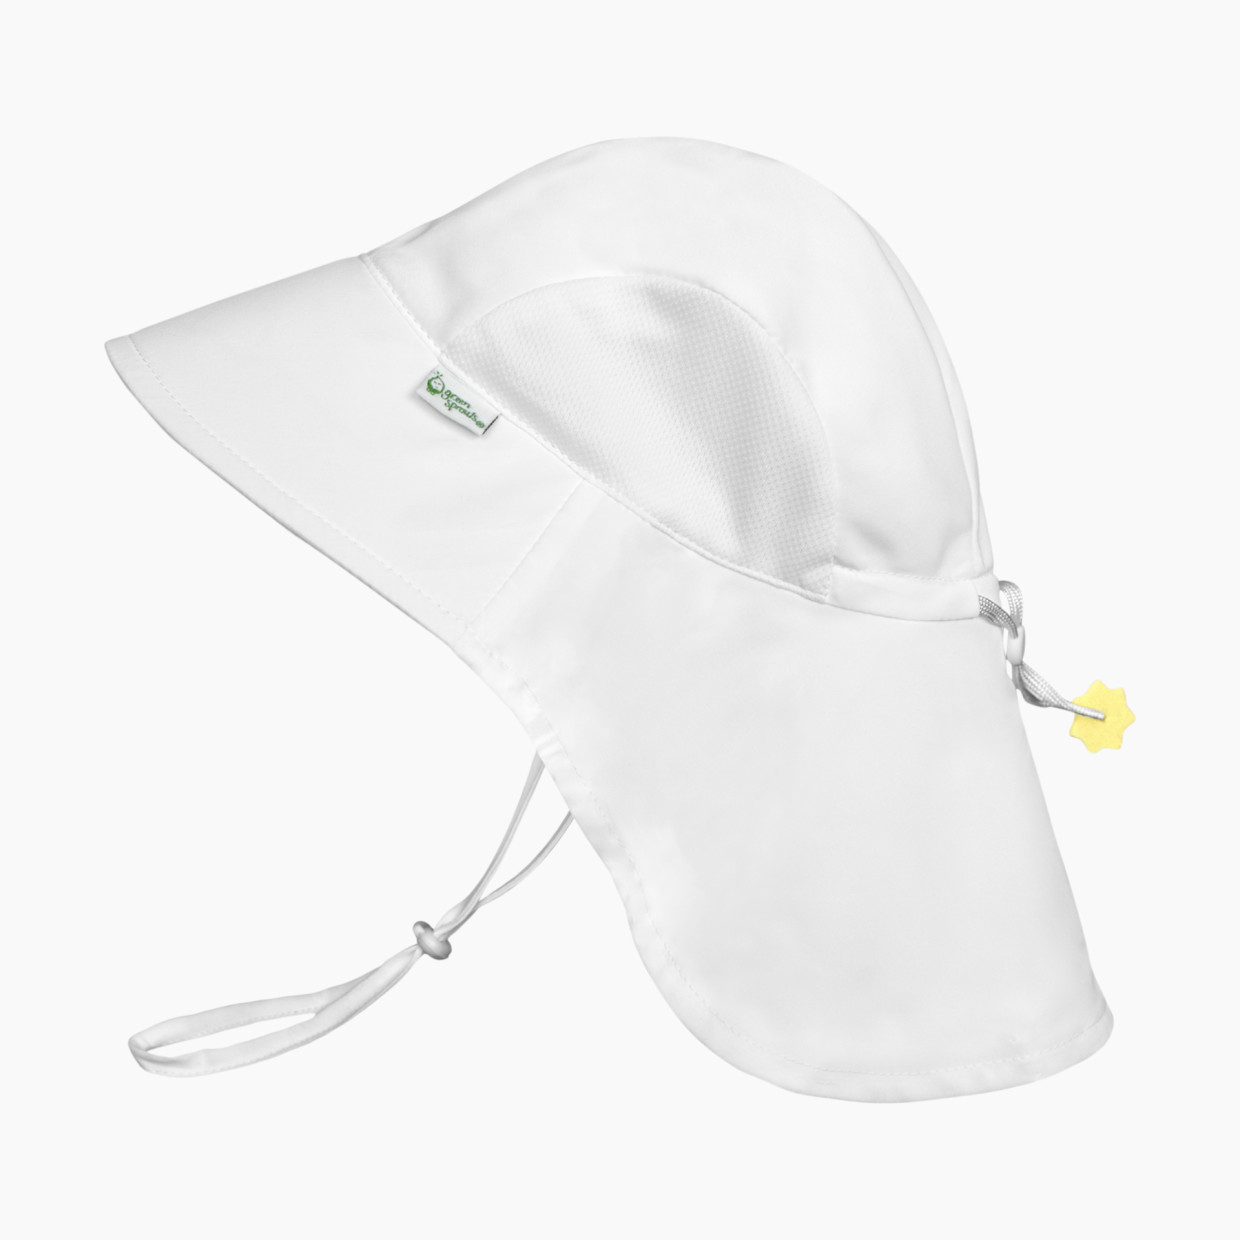 GREEN SPROUTS Adventure Sun Protection Hat - White, 0-6 Months.